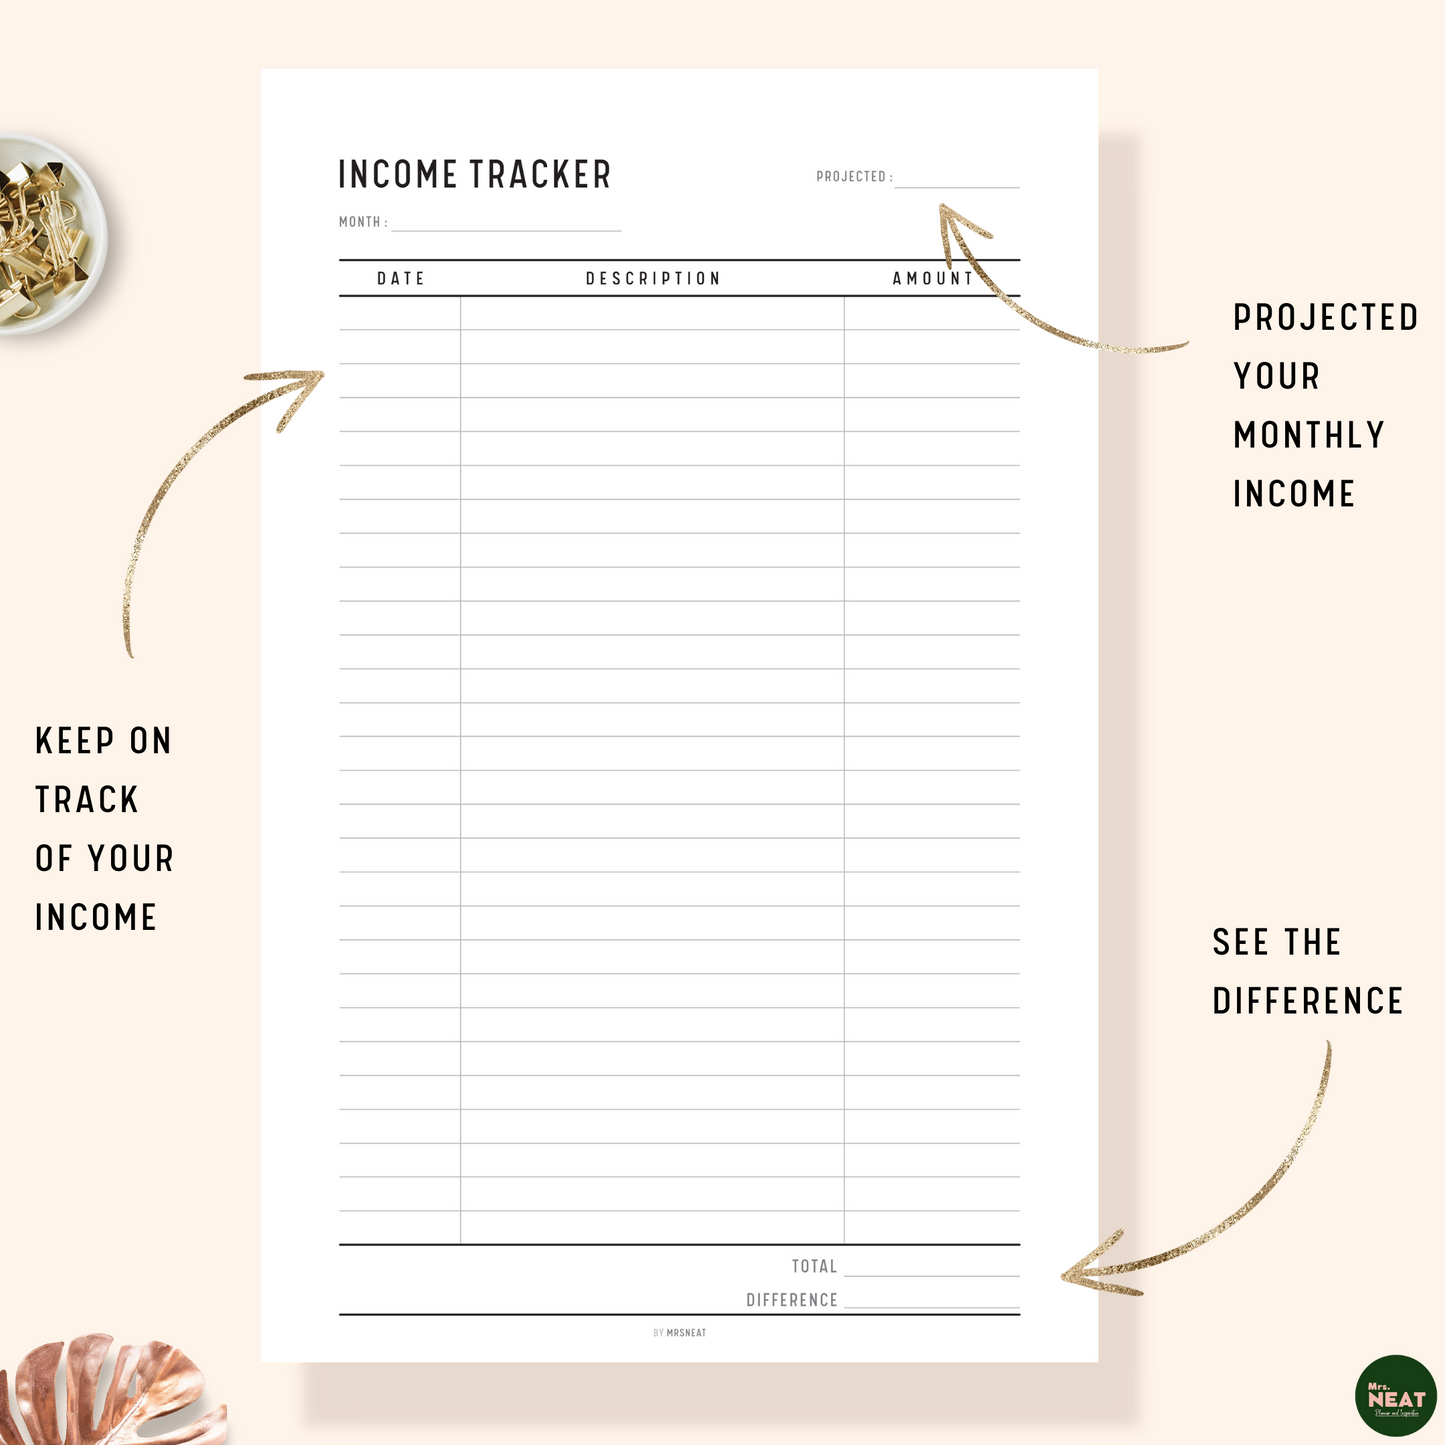 Income Tracker Planner with room for monthly projected, actual incomes, total and differences